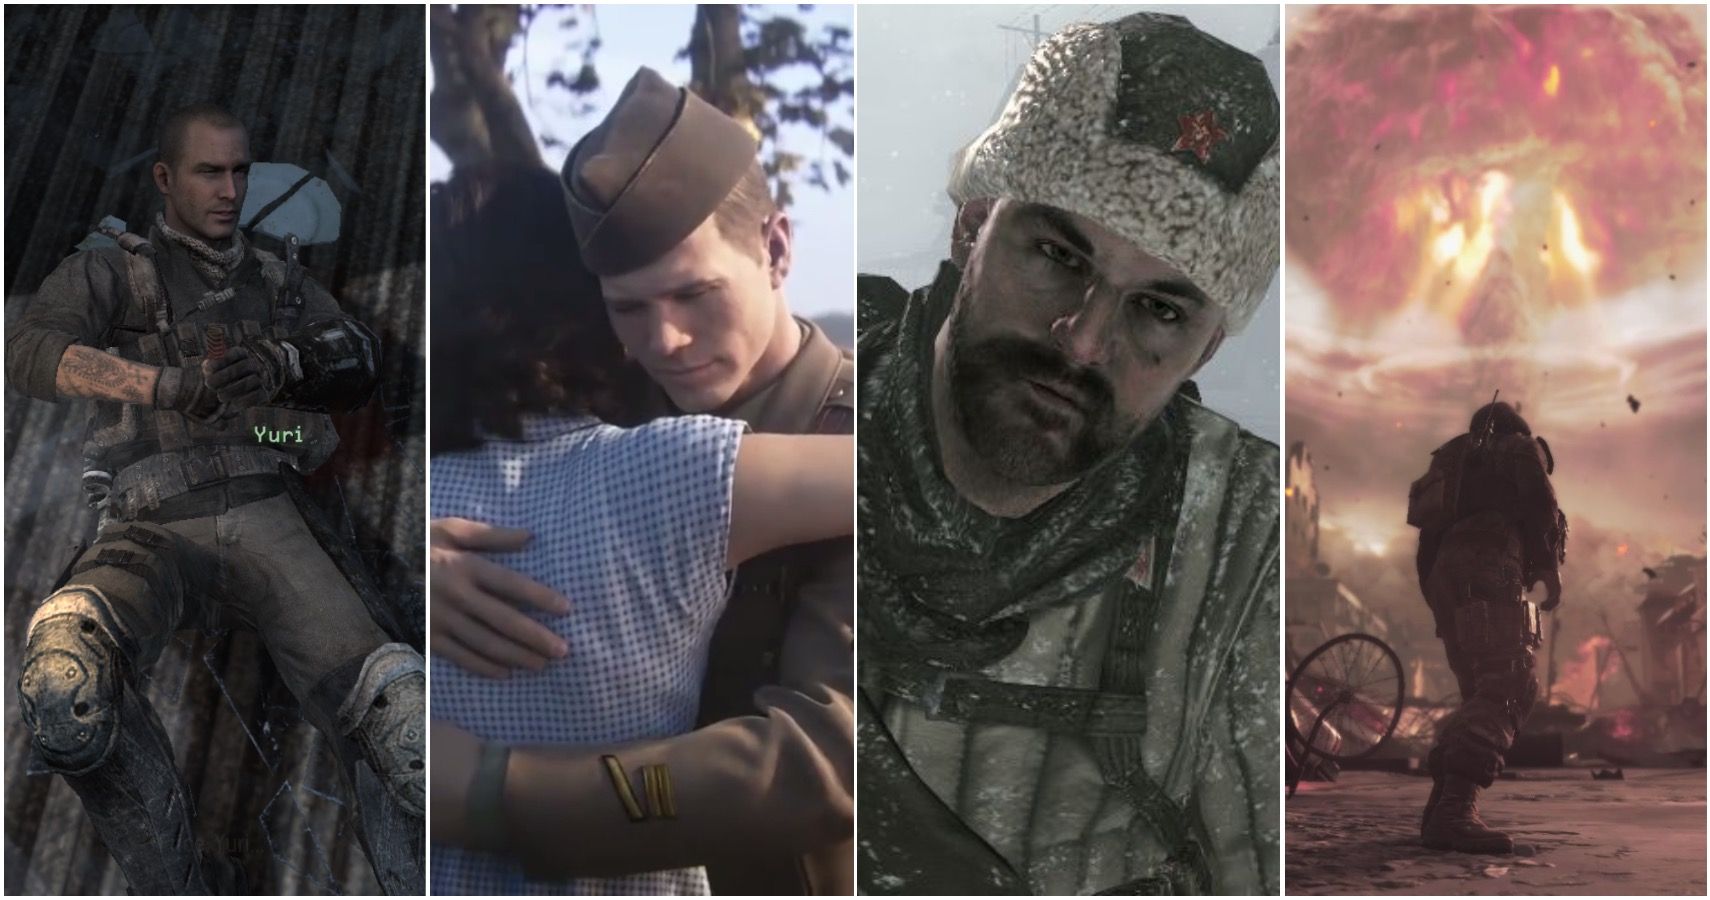 Call Of Duty: Every Single Playable Character In The Franchise, Ranked